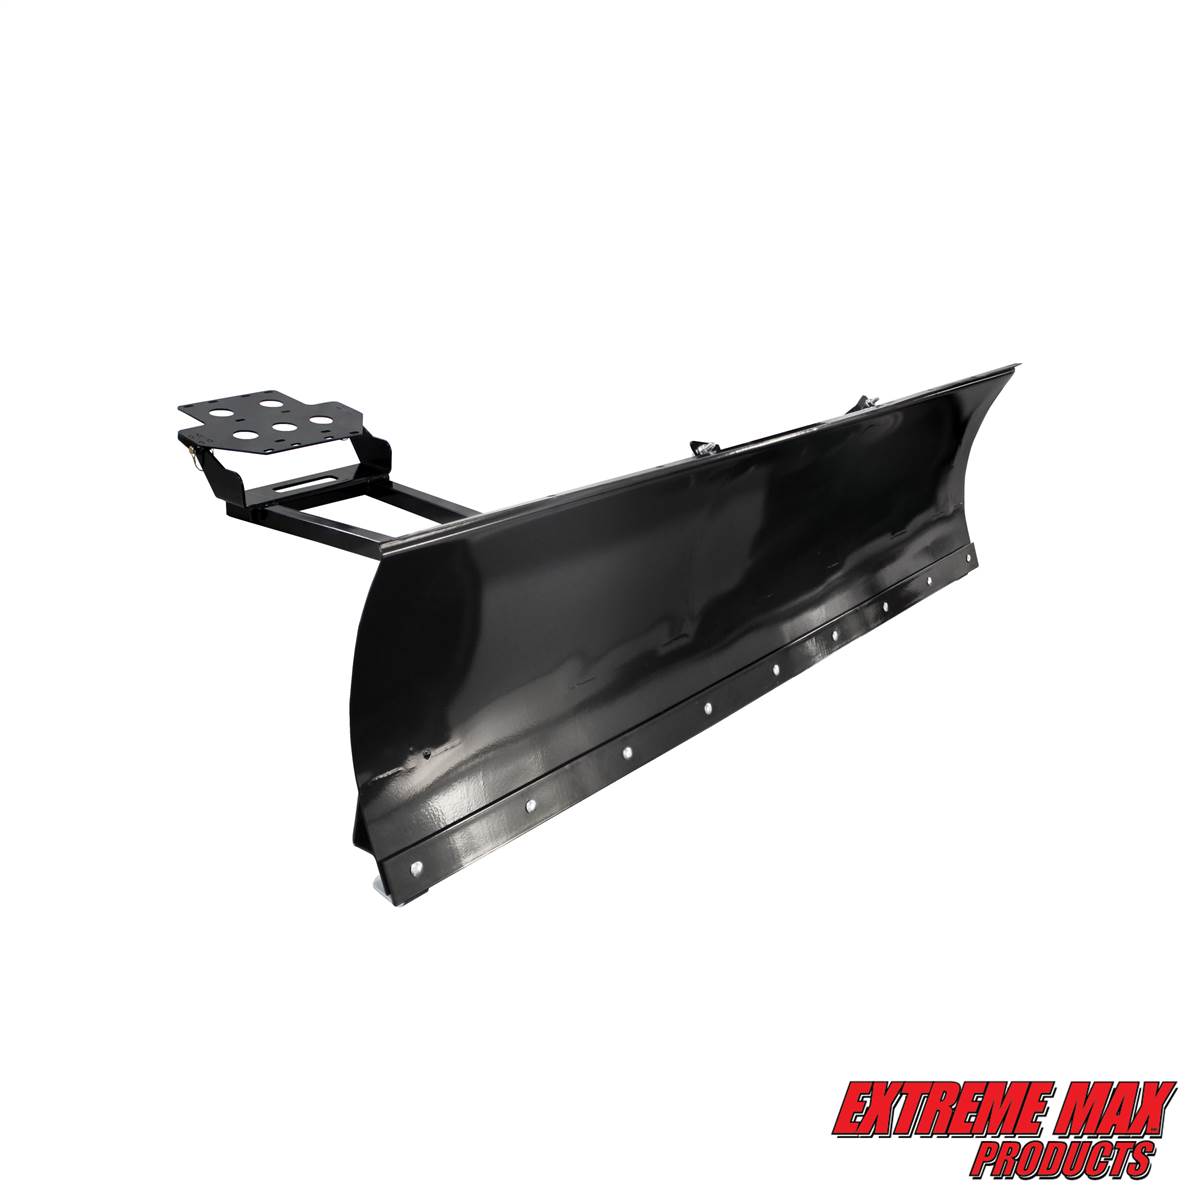 Extreme Max 5500.5112 Heavy-Duty UniPlow One-Box ATV Plow System with  Can-Am Outlander Mount 